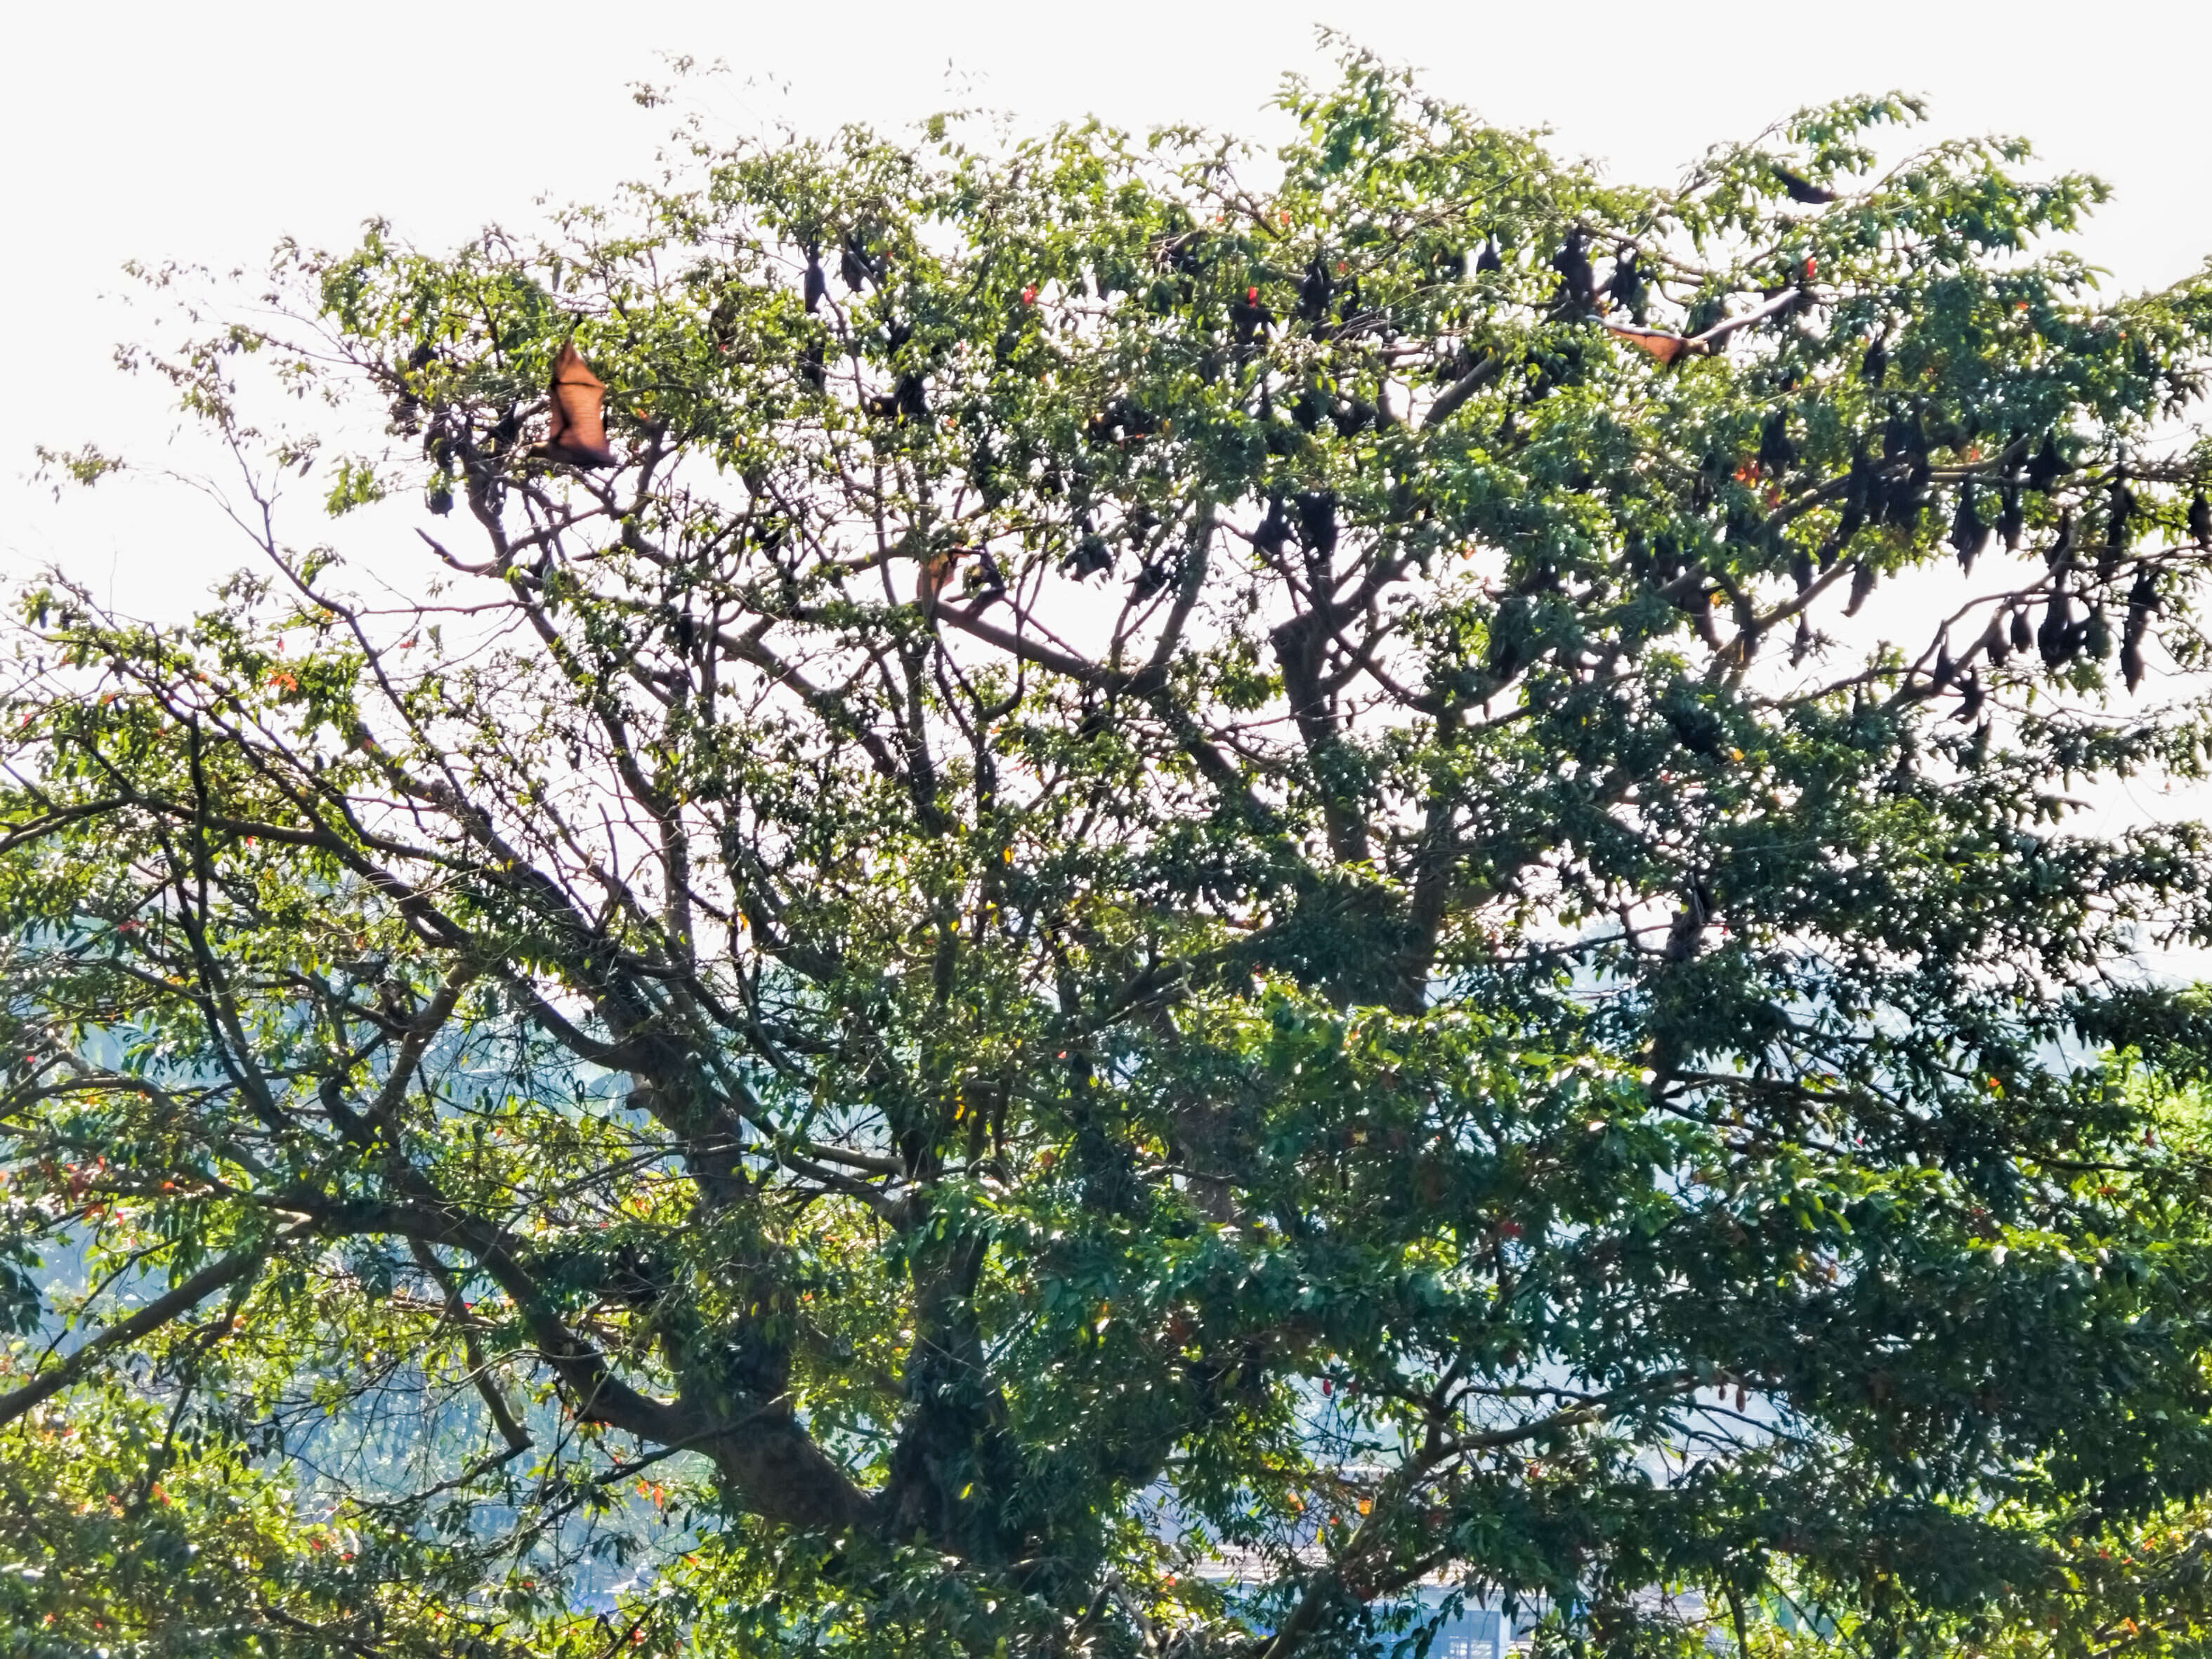 Image of Indian Flying Fox